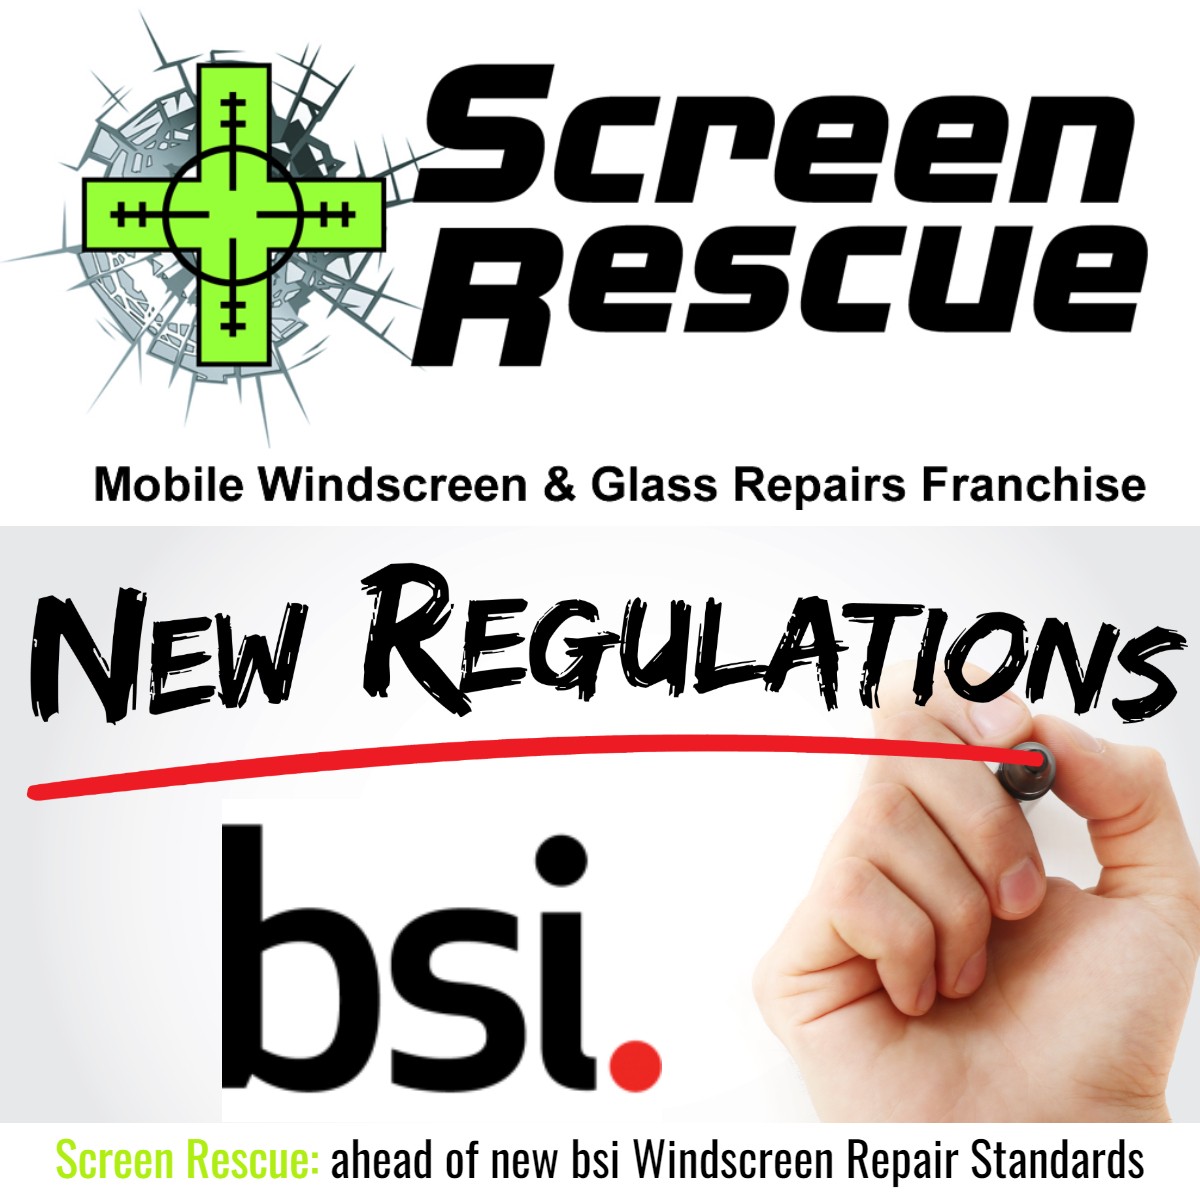 Screen Rescue secure exclusive rights to Windscreen Repair Systems ahead of new bsi standard